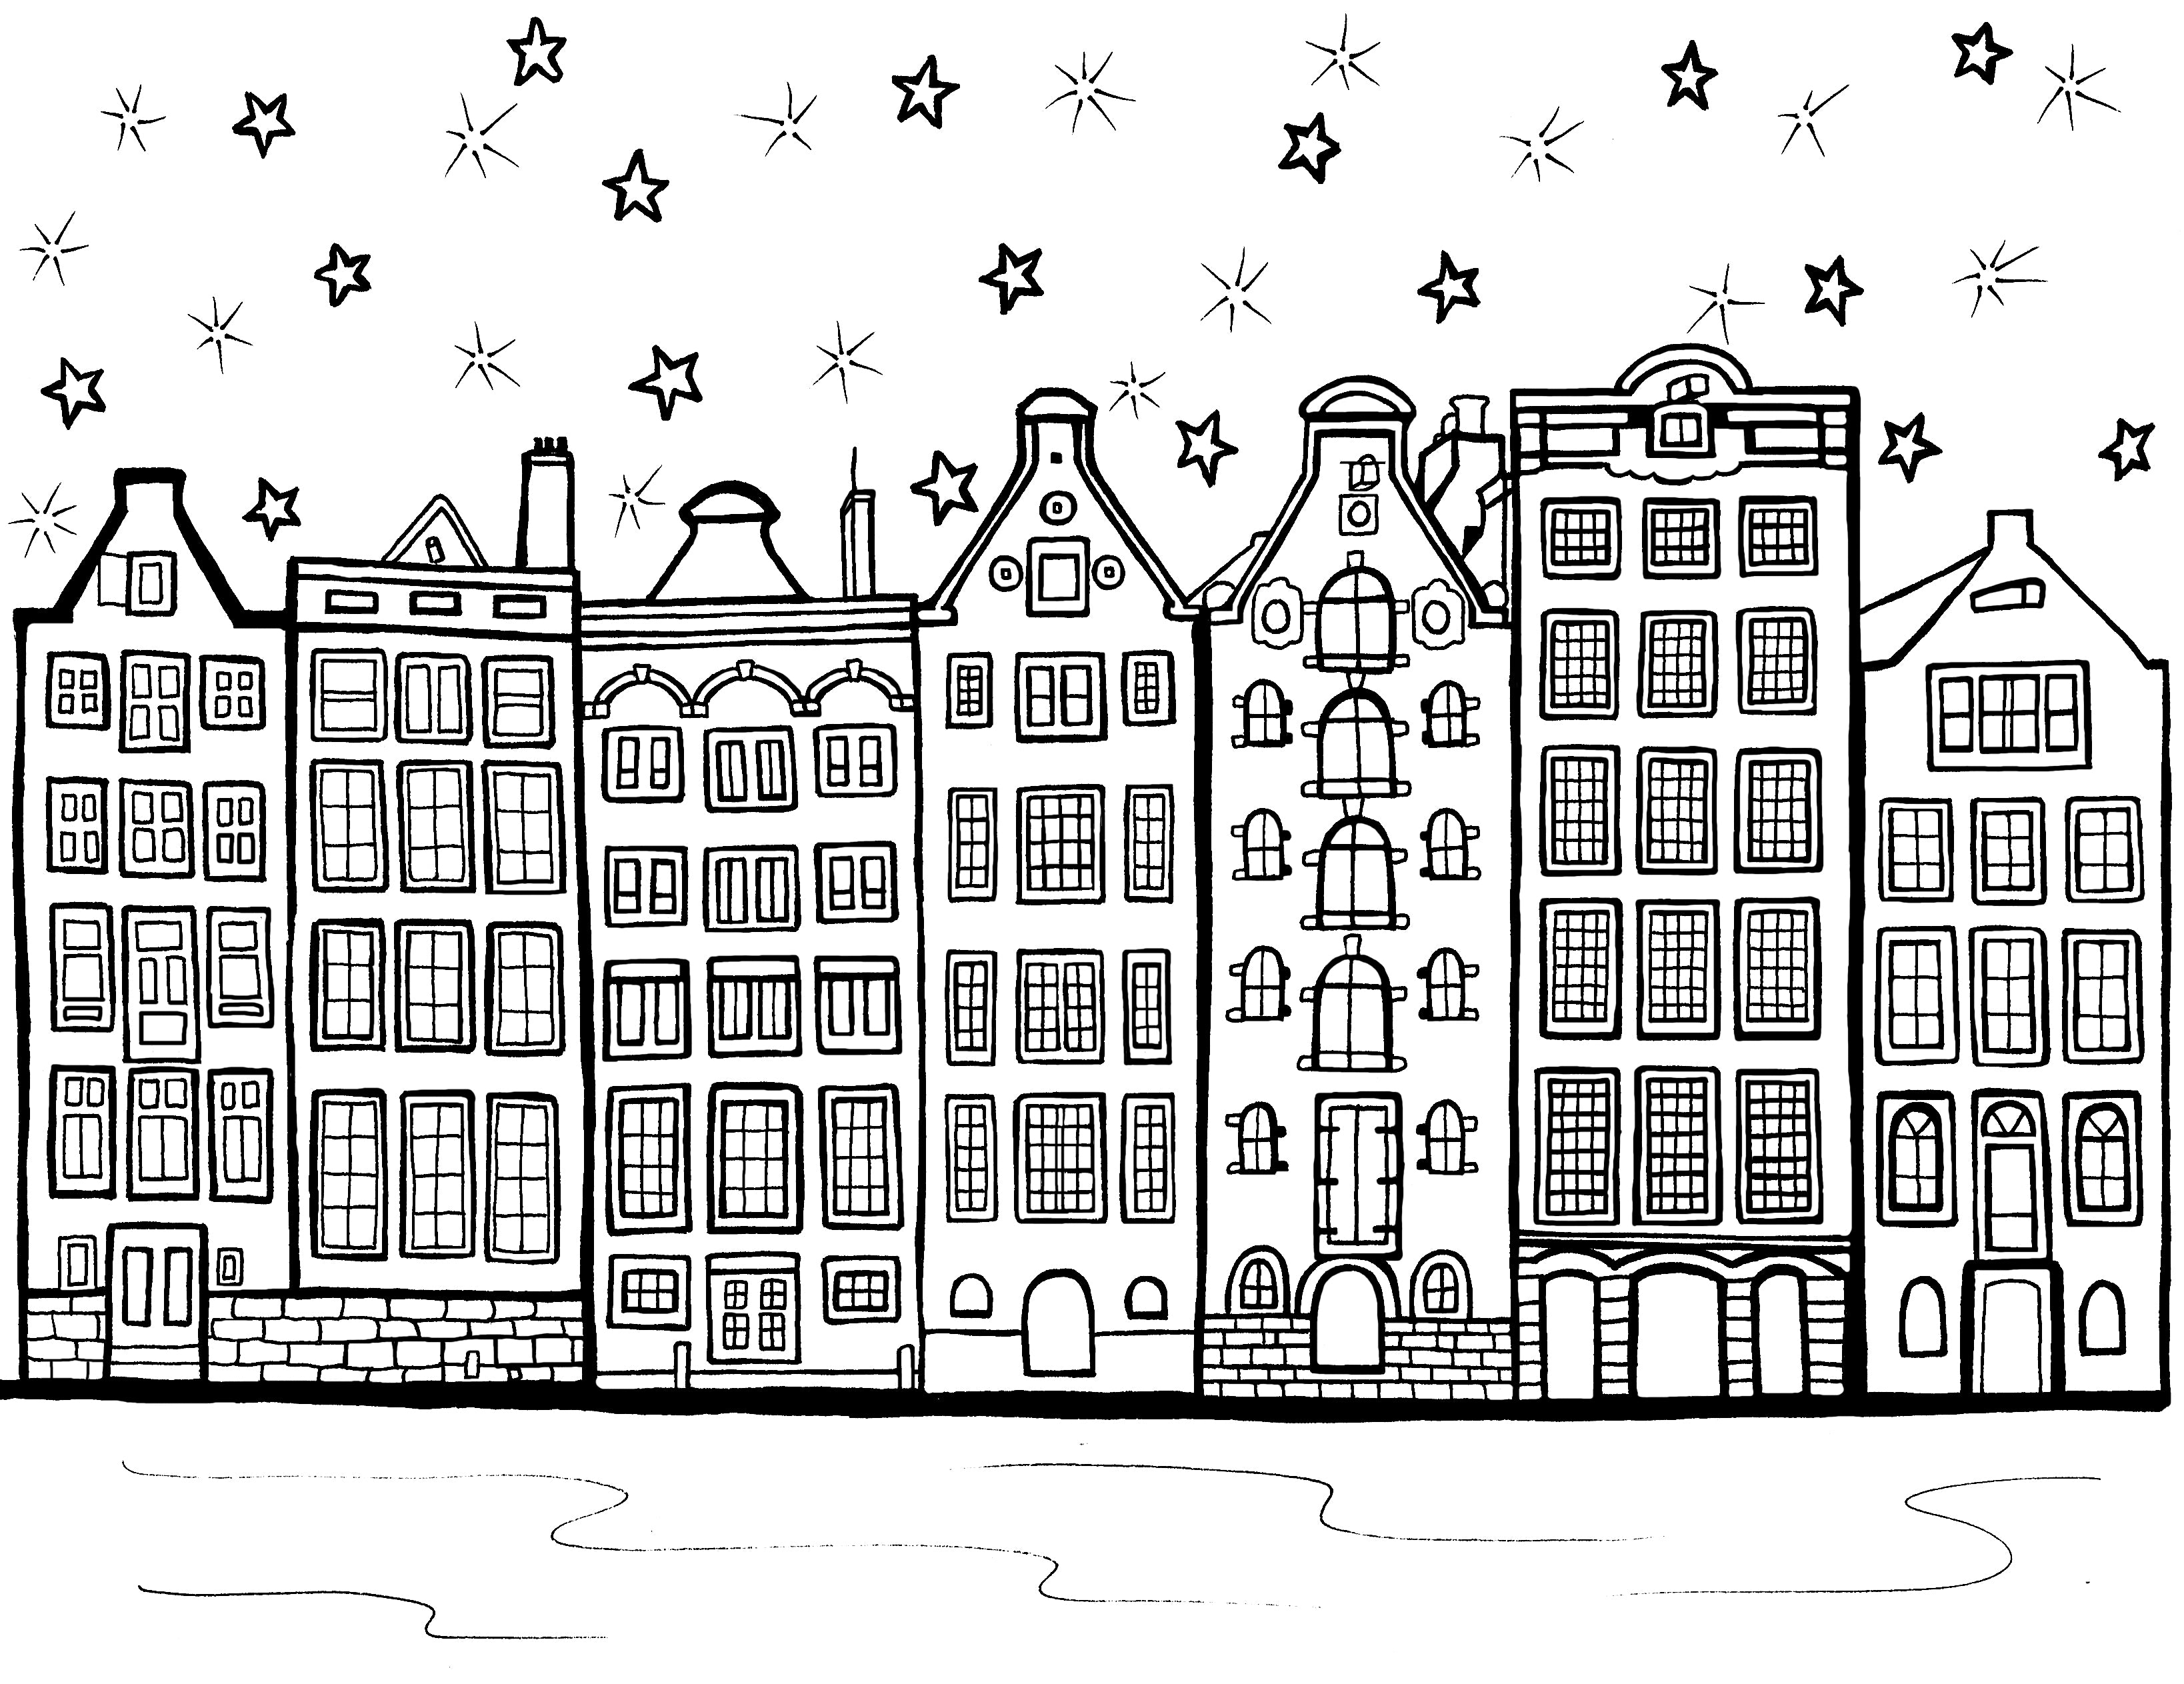 Detailed black and white coloring page depicting a charming row of Amsterdam's iconic narrow houses with their distinctive gabled facades, set along a serene canal. Above the houses, a whimsical array of stars twinkles in the sky, suggesting a peaceful night scene. The image invites colorists to add their hues to the historic architecture and tranquil waters, bringing to life the essence of a quiet evening in Amsterdam. Free coloring page  :: You-Color